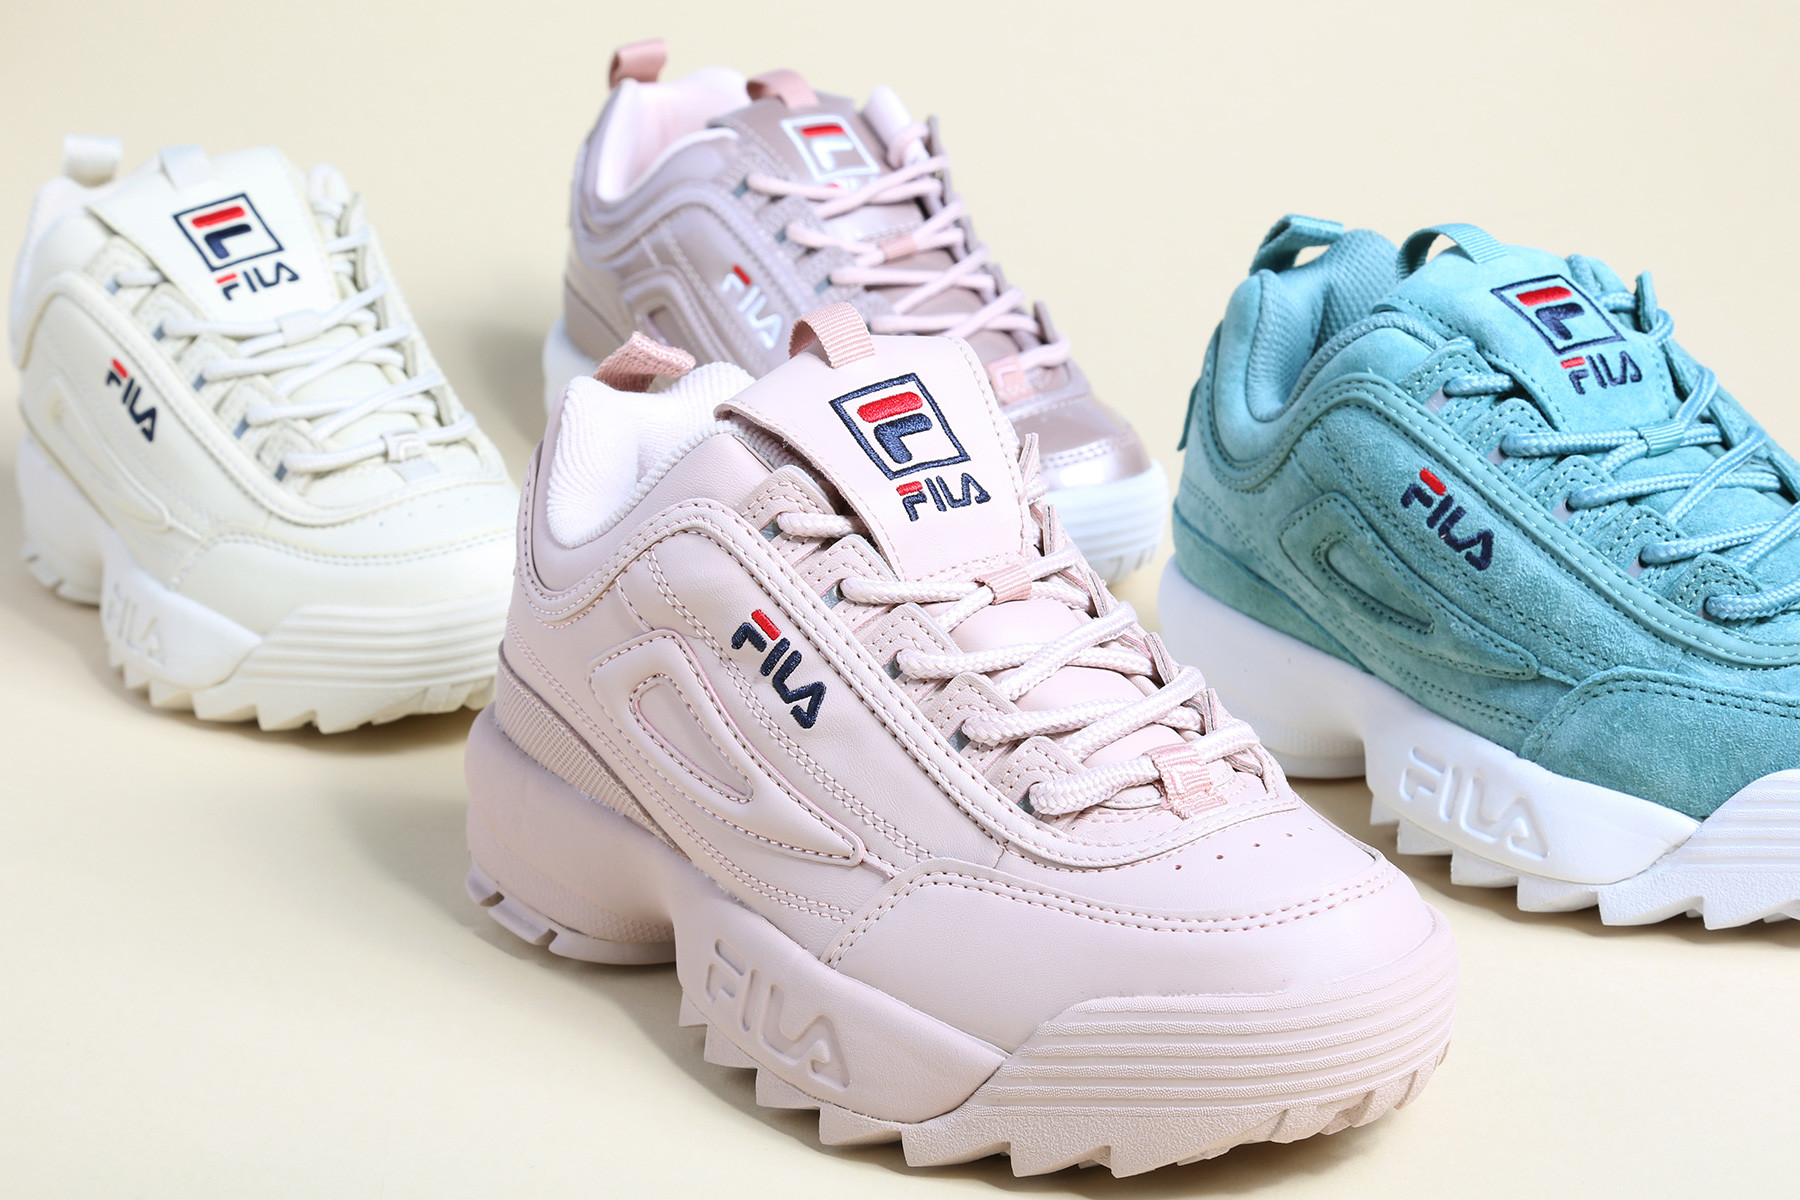 Fila Disruptor Outfit Ideas for Women 